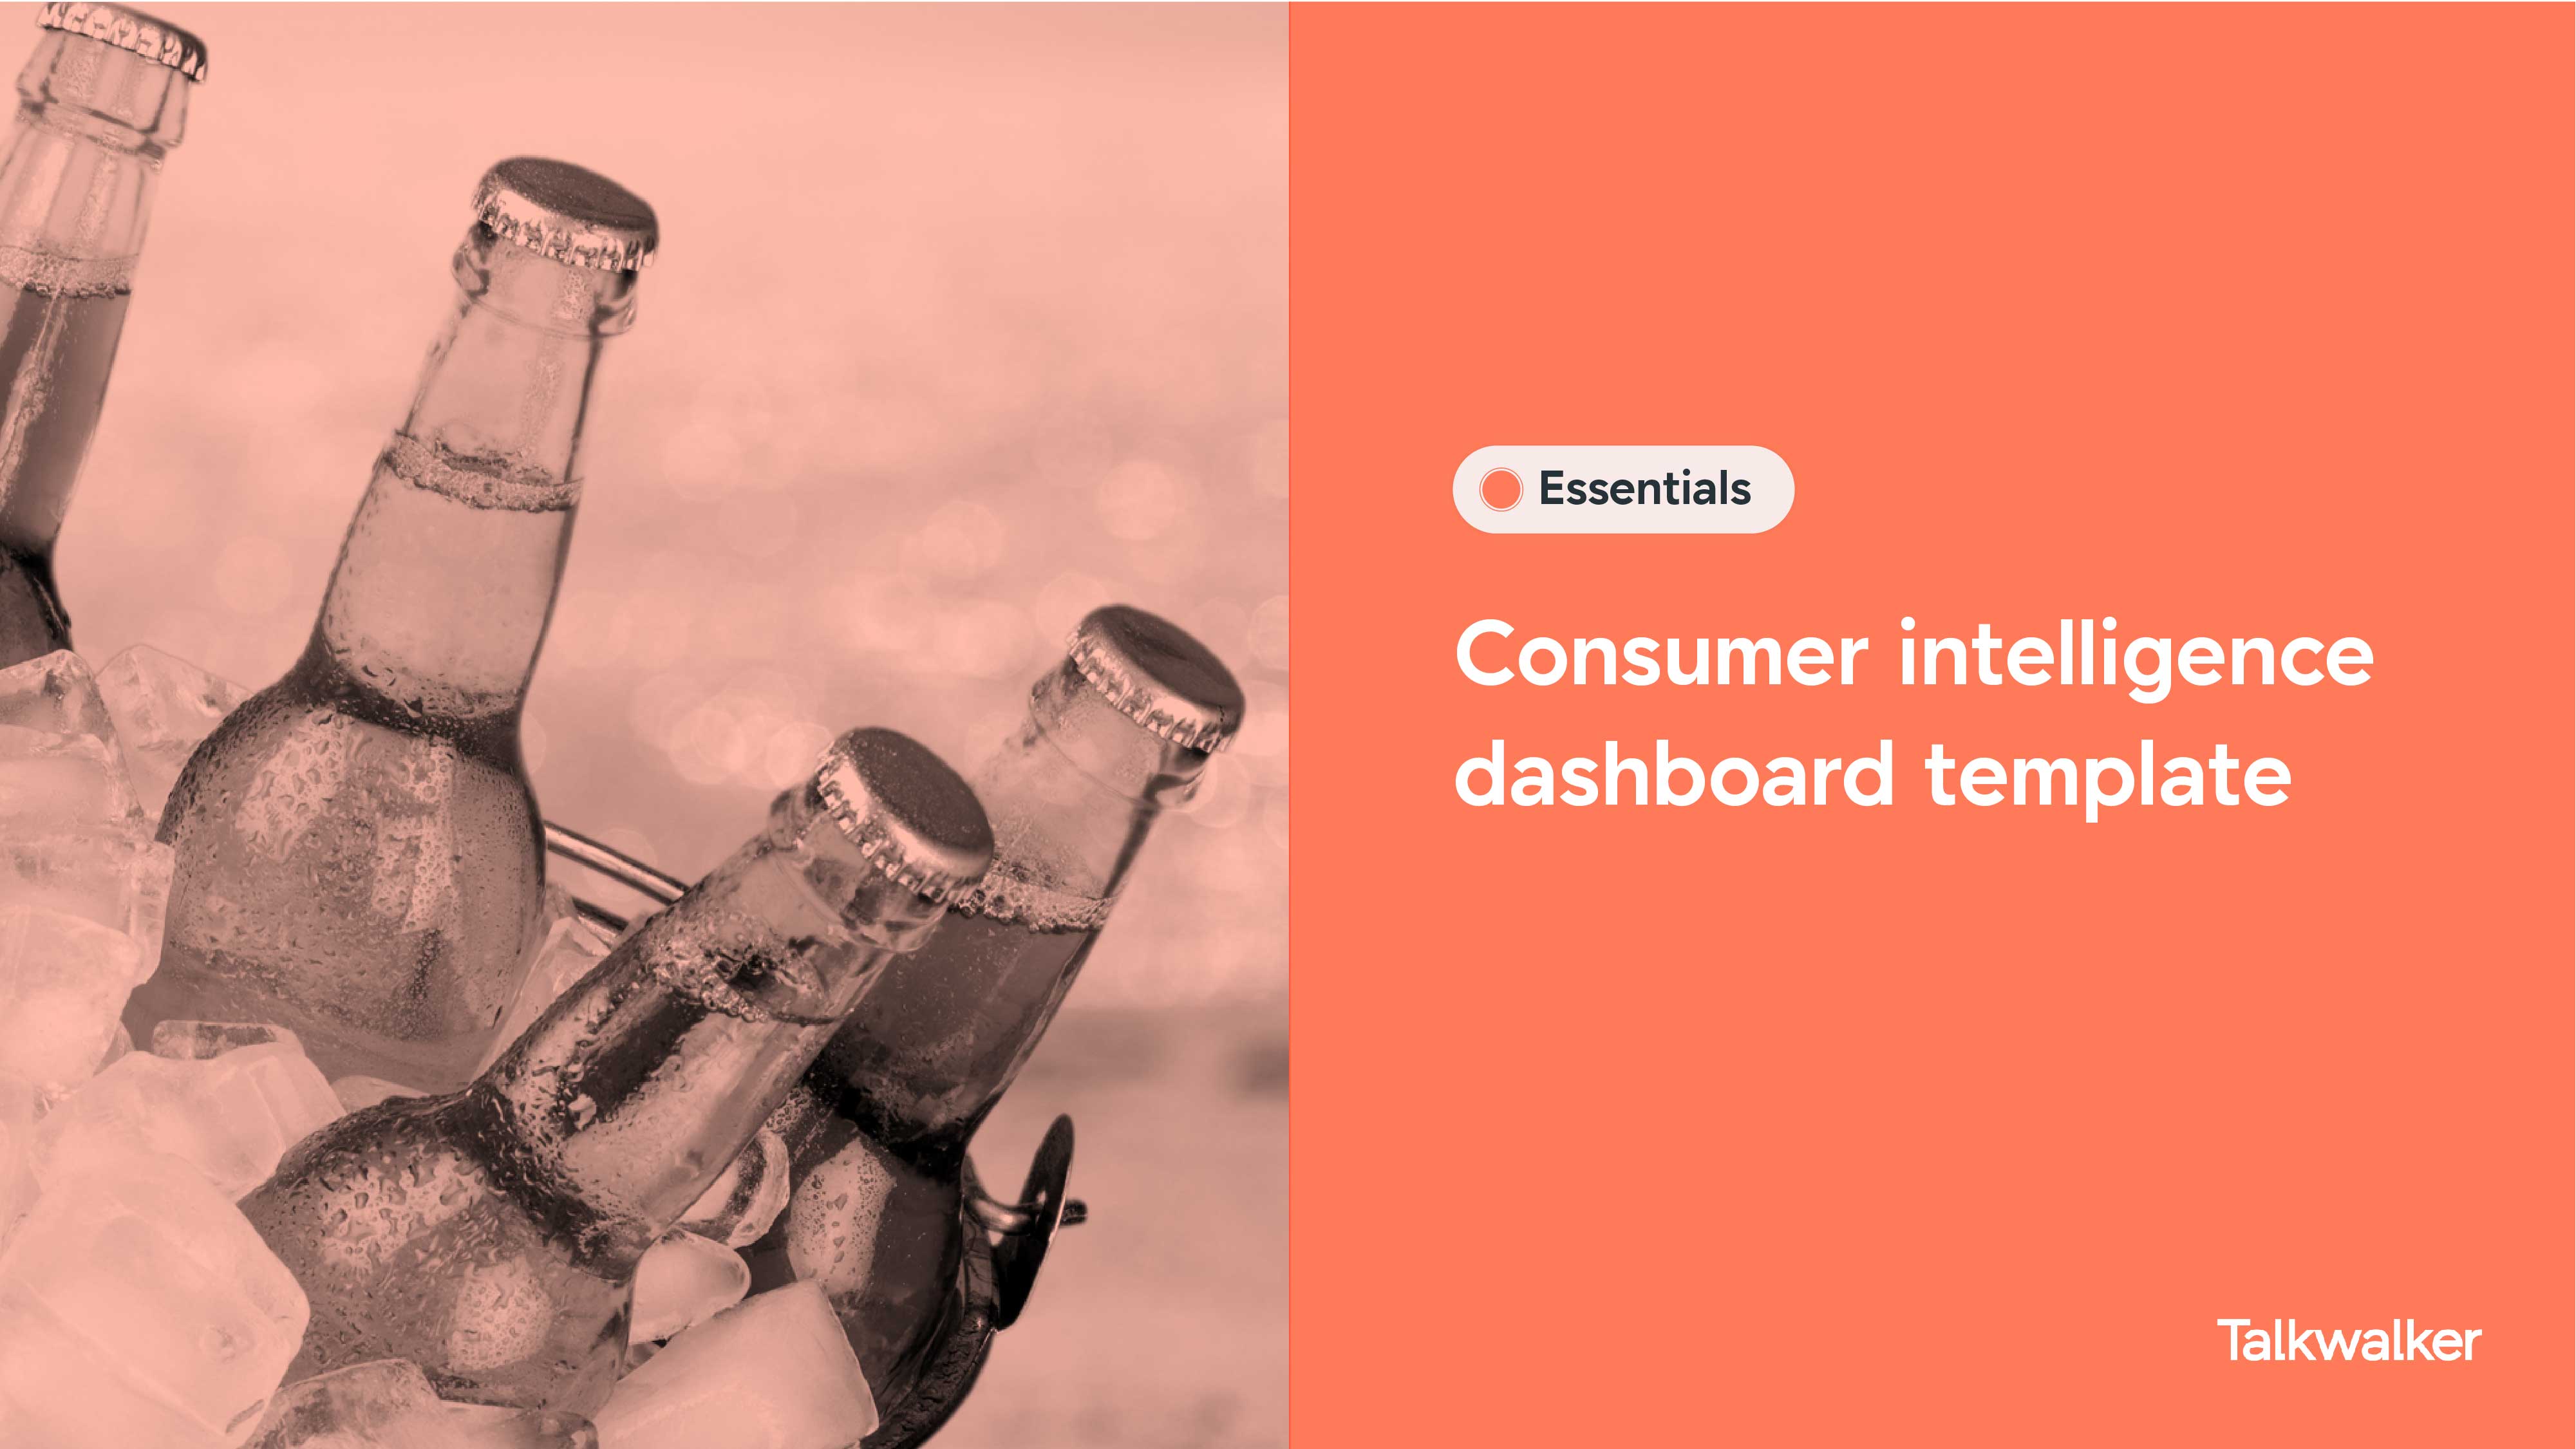 Consumer intelligence dashboard template of soda industry - image of bottles in ice bucket